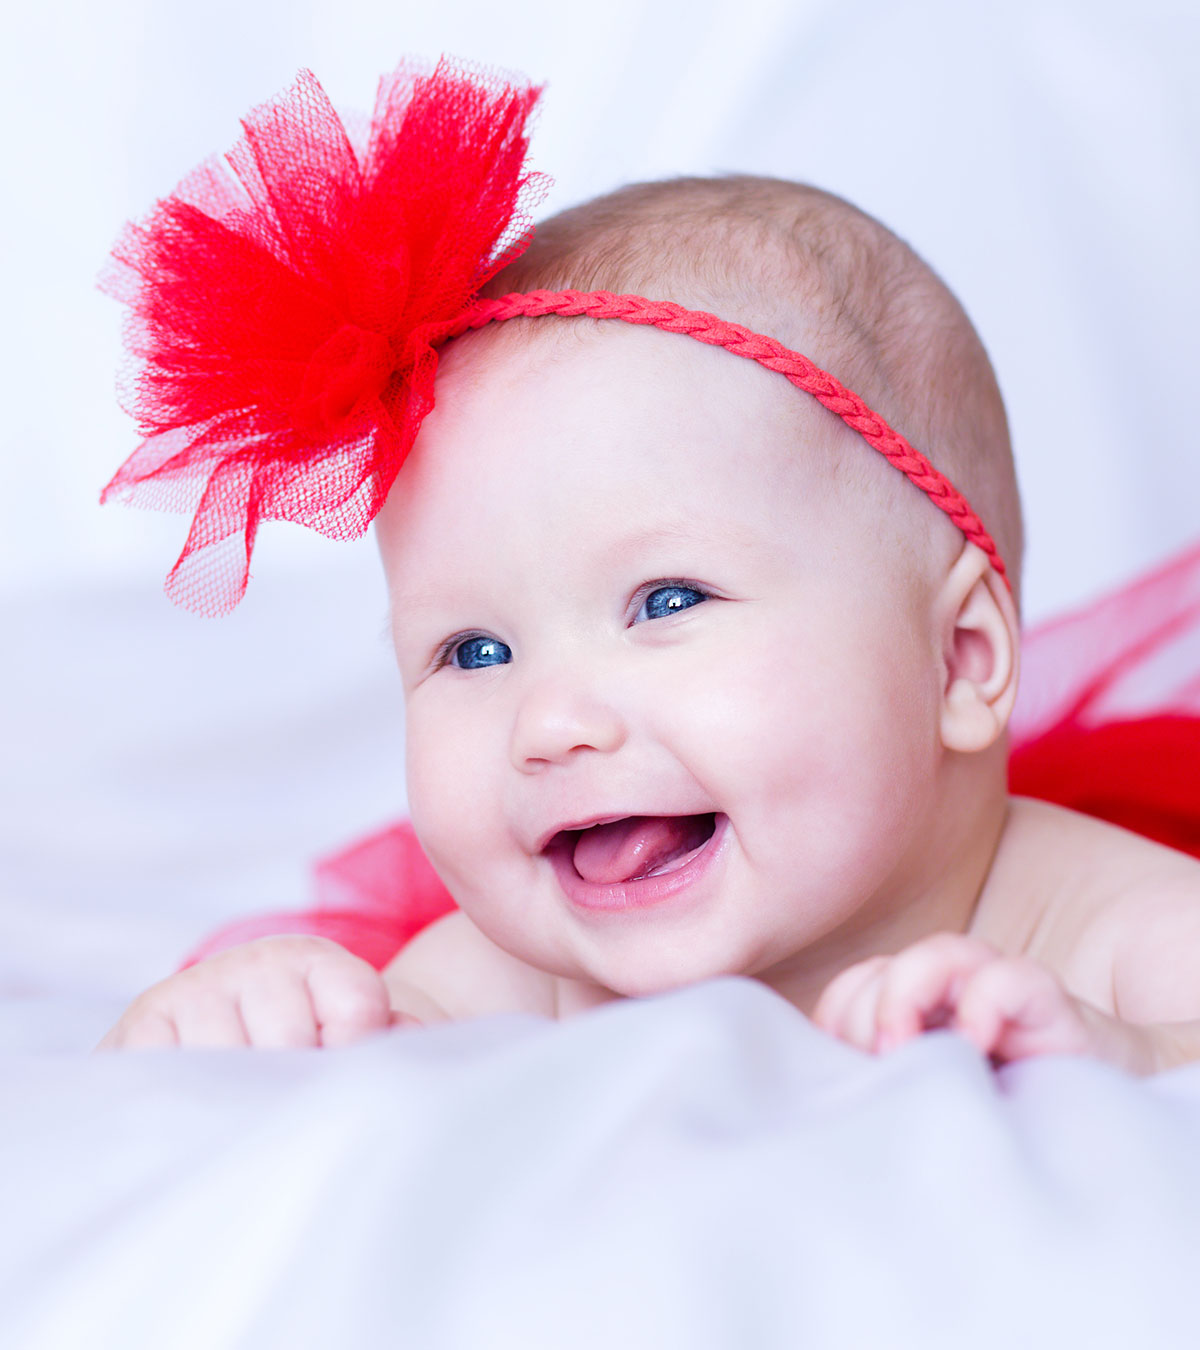 50 Amazing And Latest Basque Baby Names For Girls And Boys